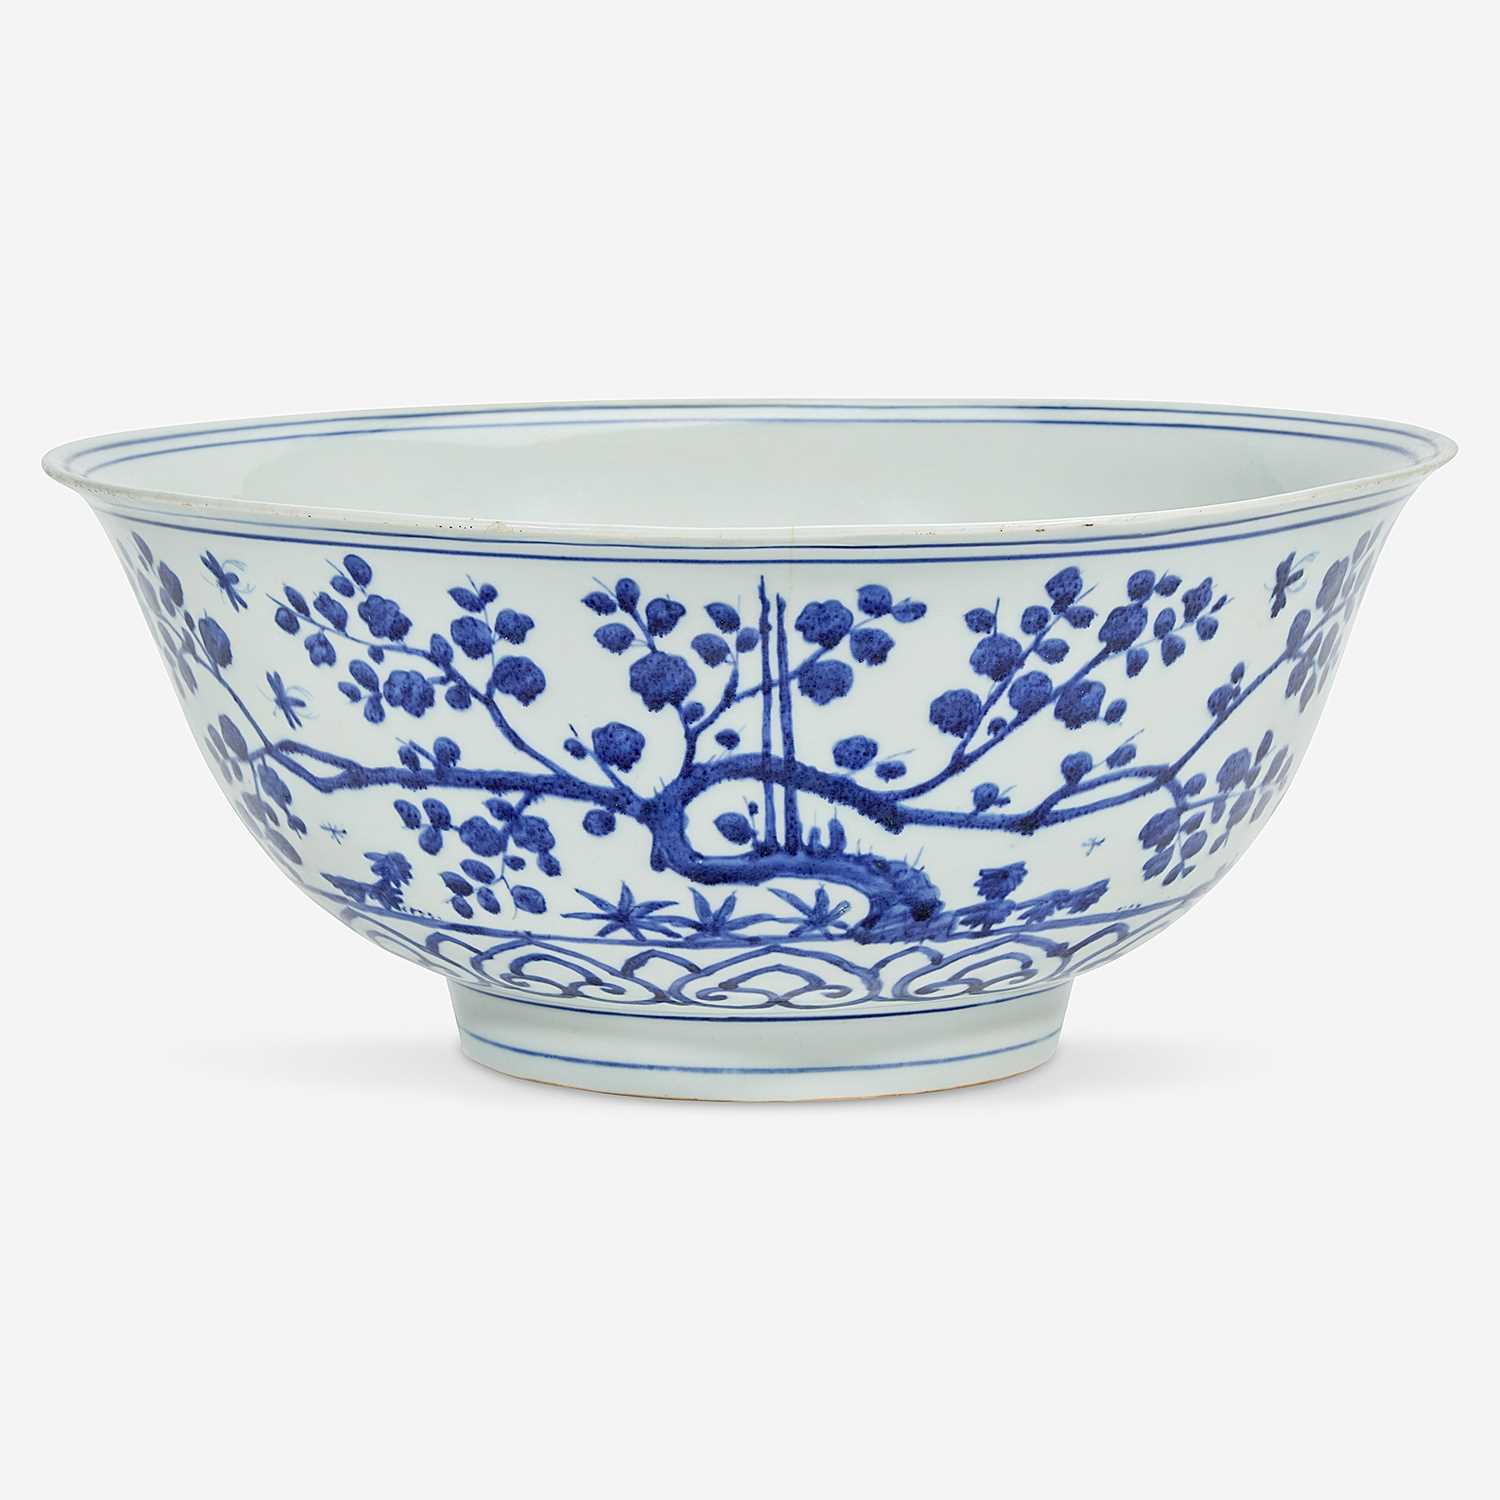 Lot 1 - A Chinese blue and white porcelain large bowl